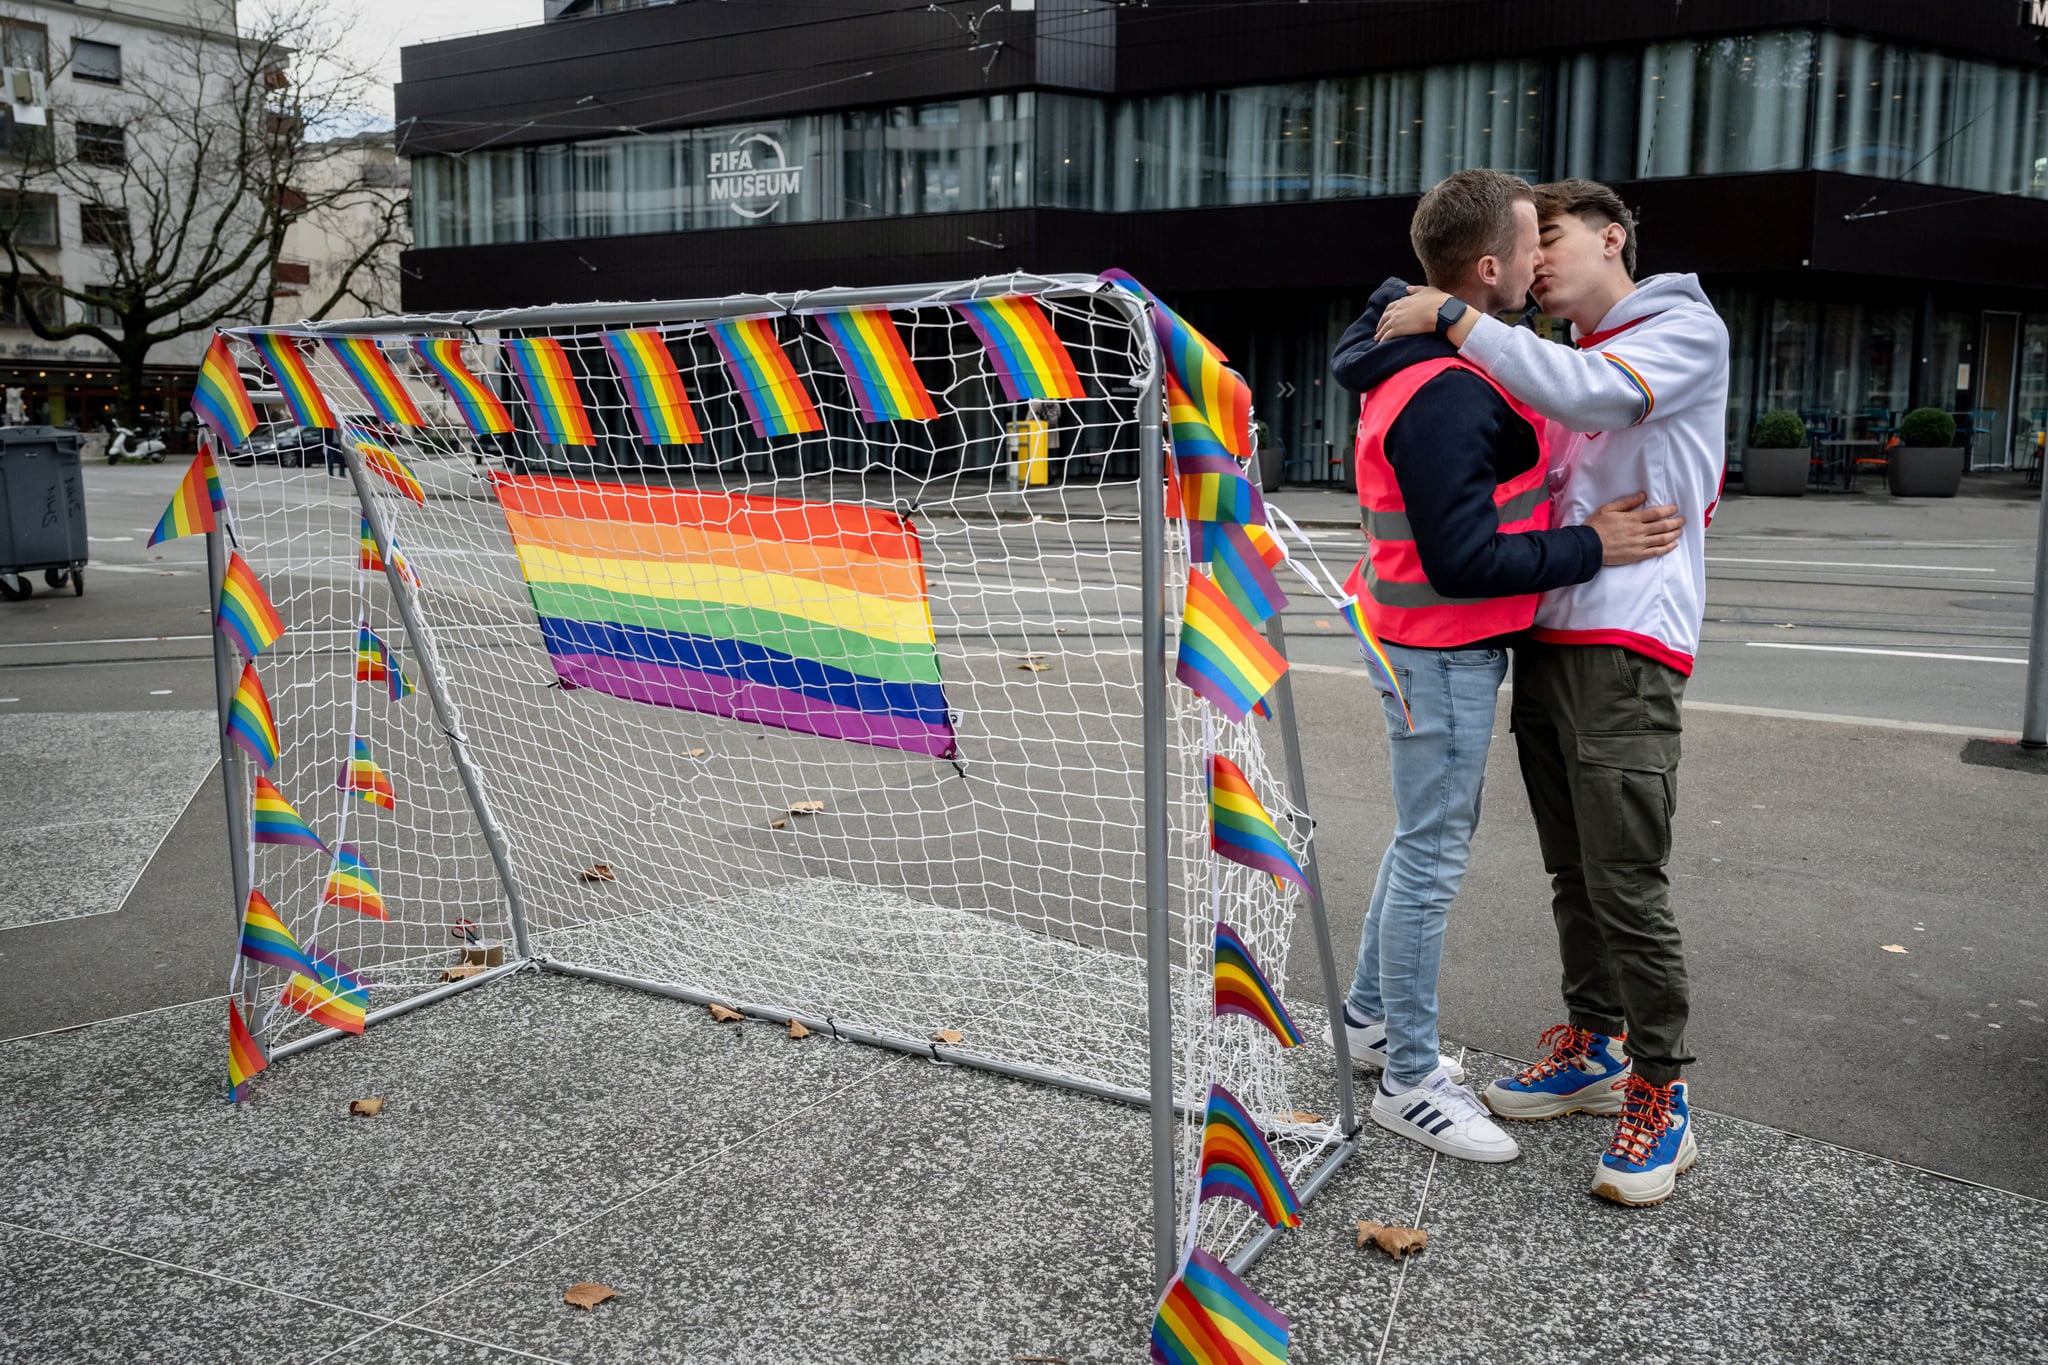 Two men kisses next to a goal during a symbolic action by LGBT+ associations in front of the FIFA museum in Zurich on November 8, 2022, to call FIFA to defend the rights of the LGBT+ community ahead of the Qatar 2022 FIFA World Cup football tournament that will start on November 20. (Photo by Fabrice COFFRINI / AFP) (Photo by FABRICE COFFRINI/AFP via Getty Images)